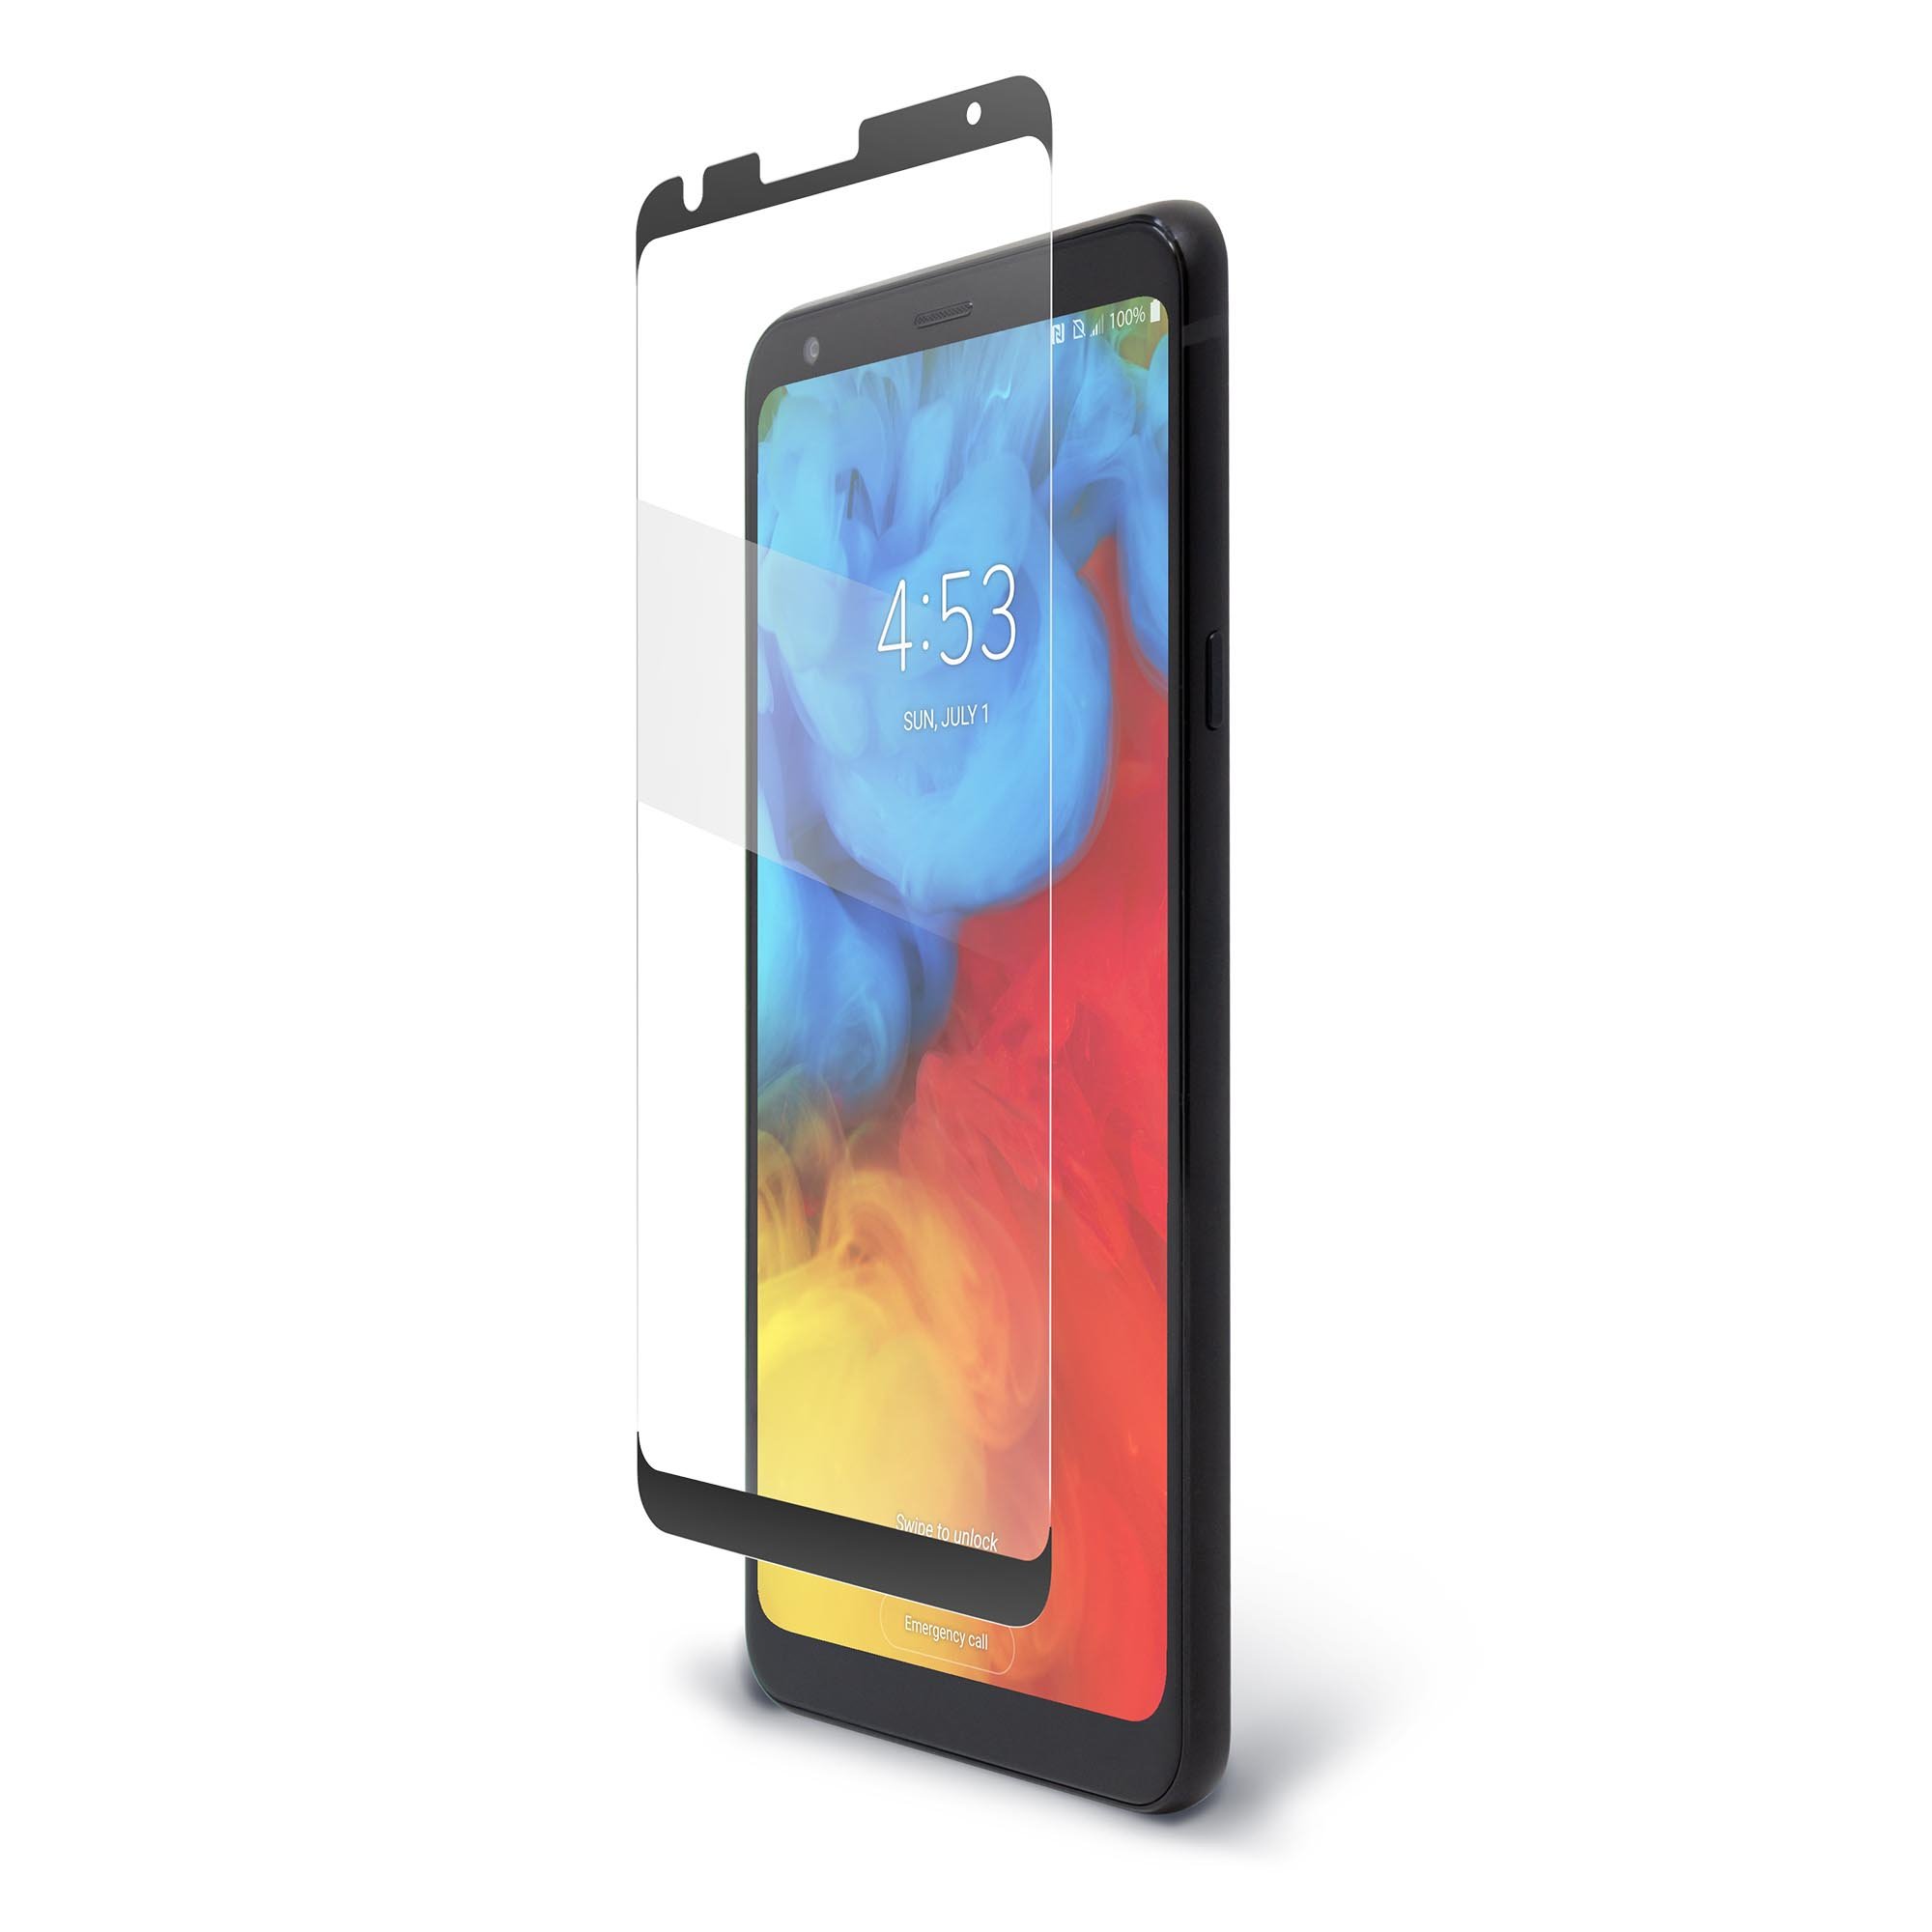 Stylo 4+ LG Stylo 4+ Cases, Clear Screen Protectors, Covers & Skins